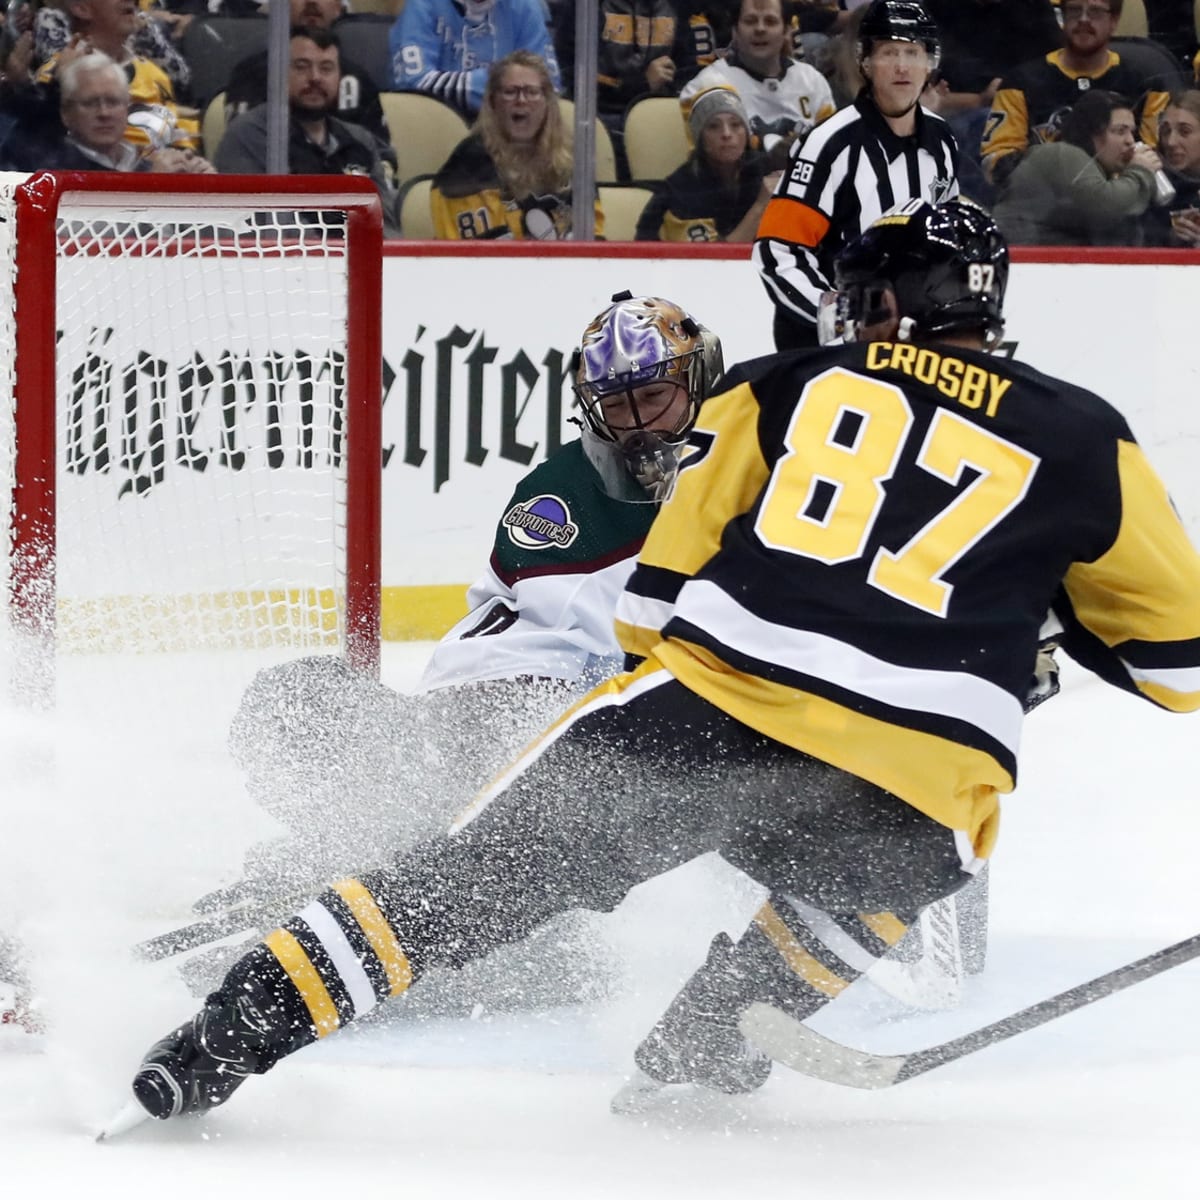 Sidney Crosby: Penguins captain is NHL First Star of the Week